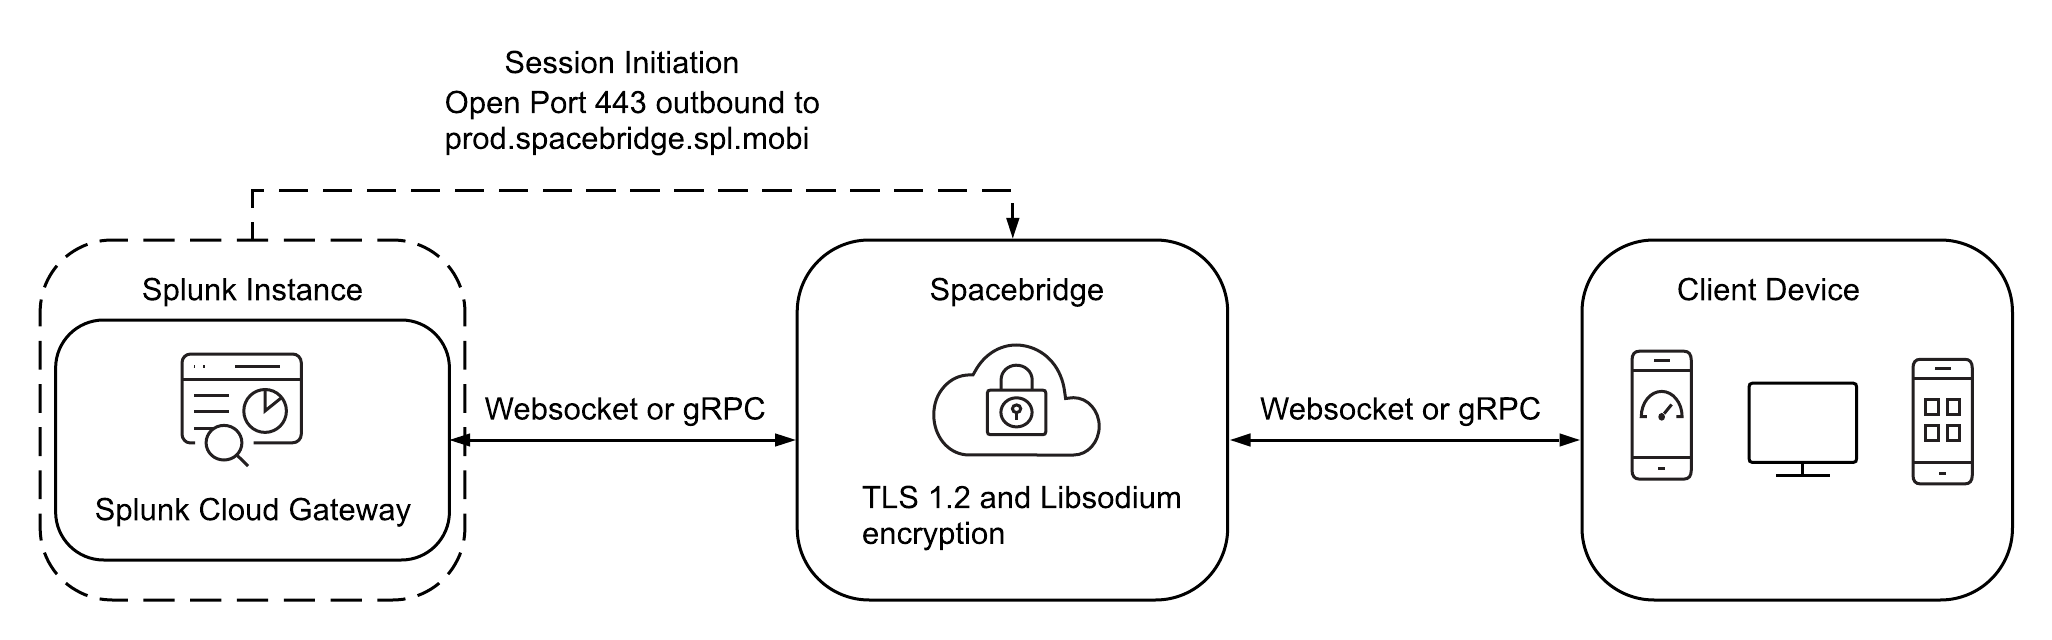 This diagram shows the bidirectional communication between mobile devices and the Splunk Cloud Gateway app, with Spacebridge in between as an intermediary message router.